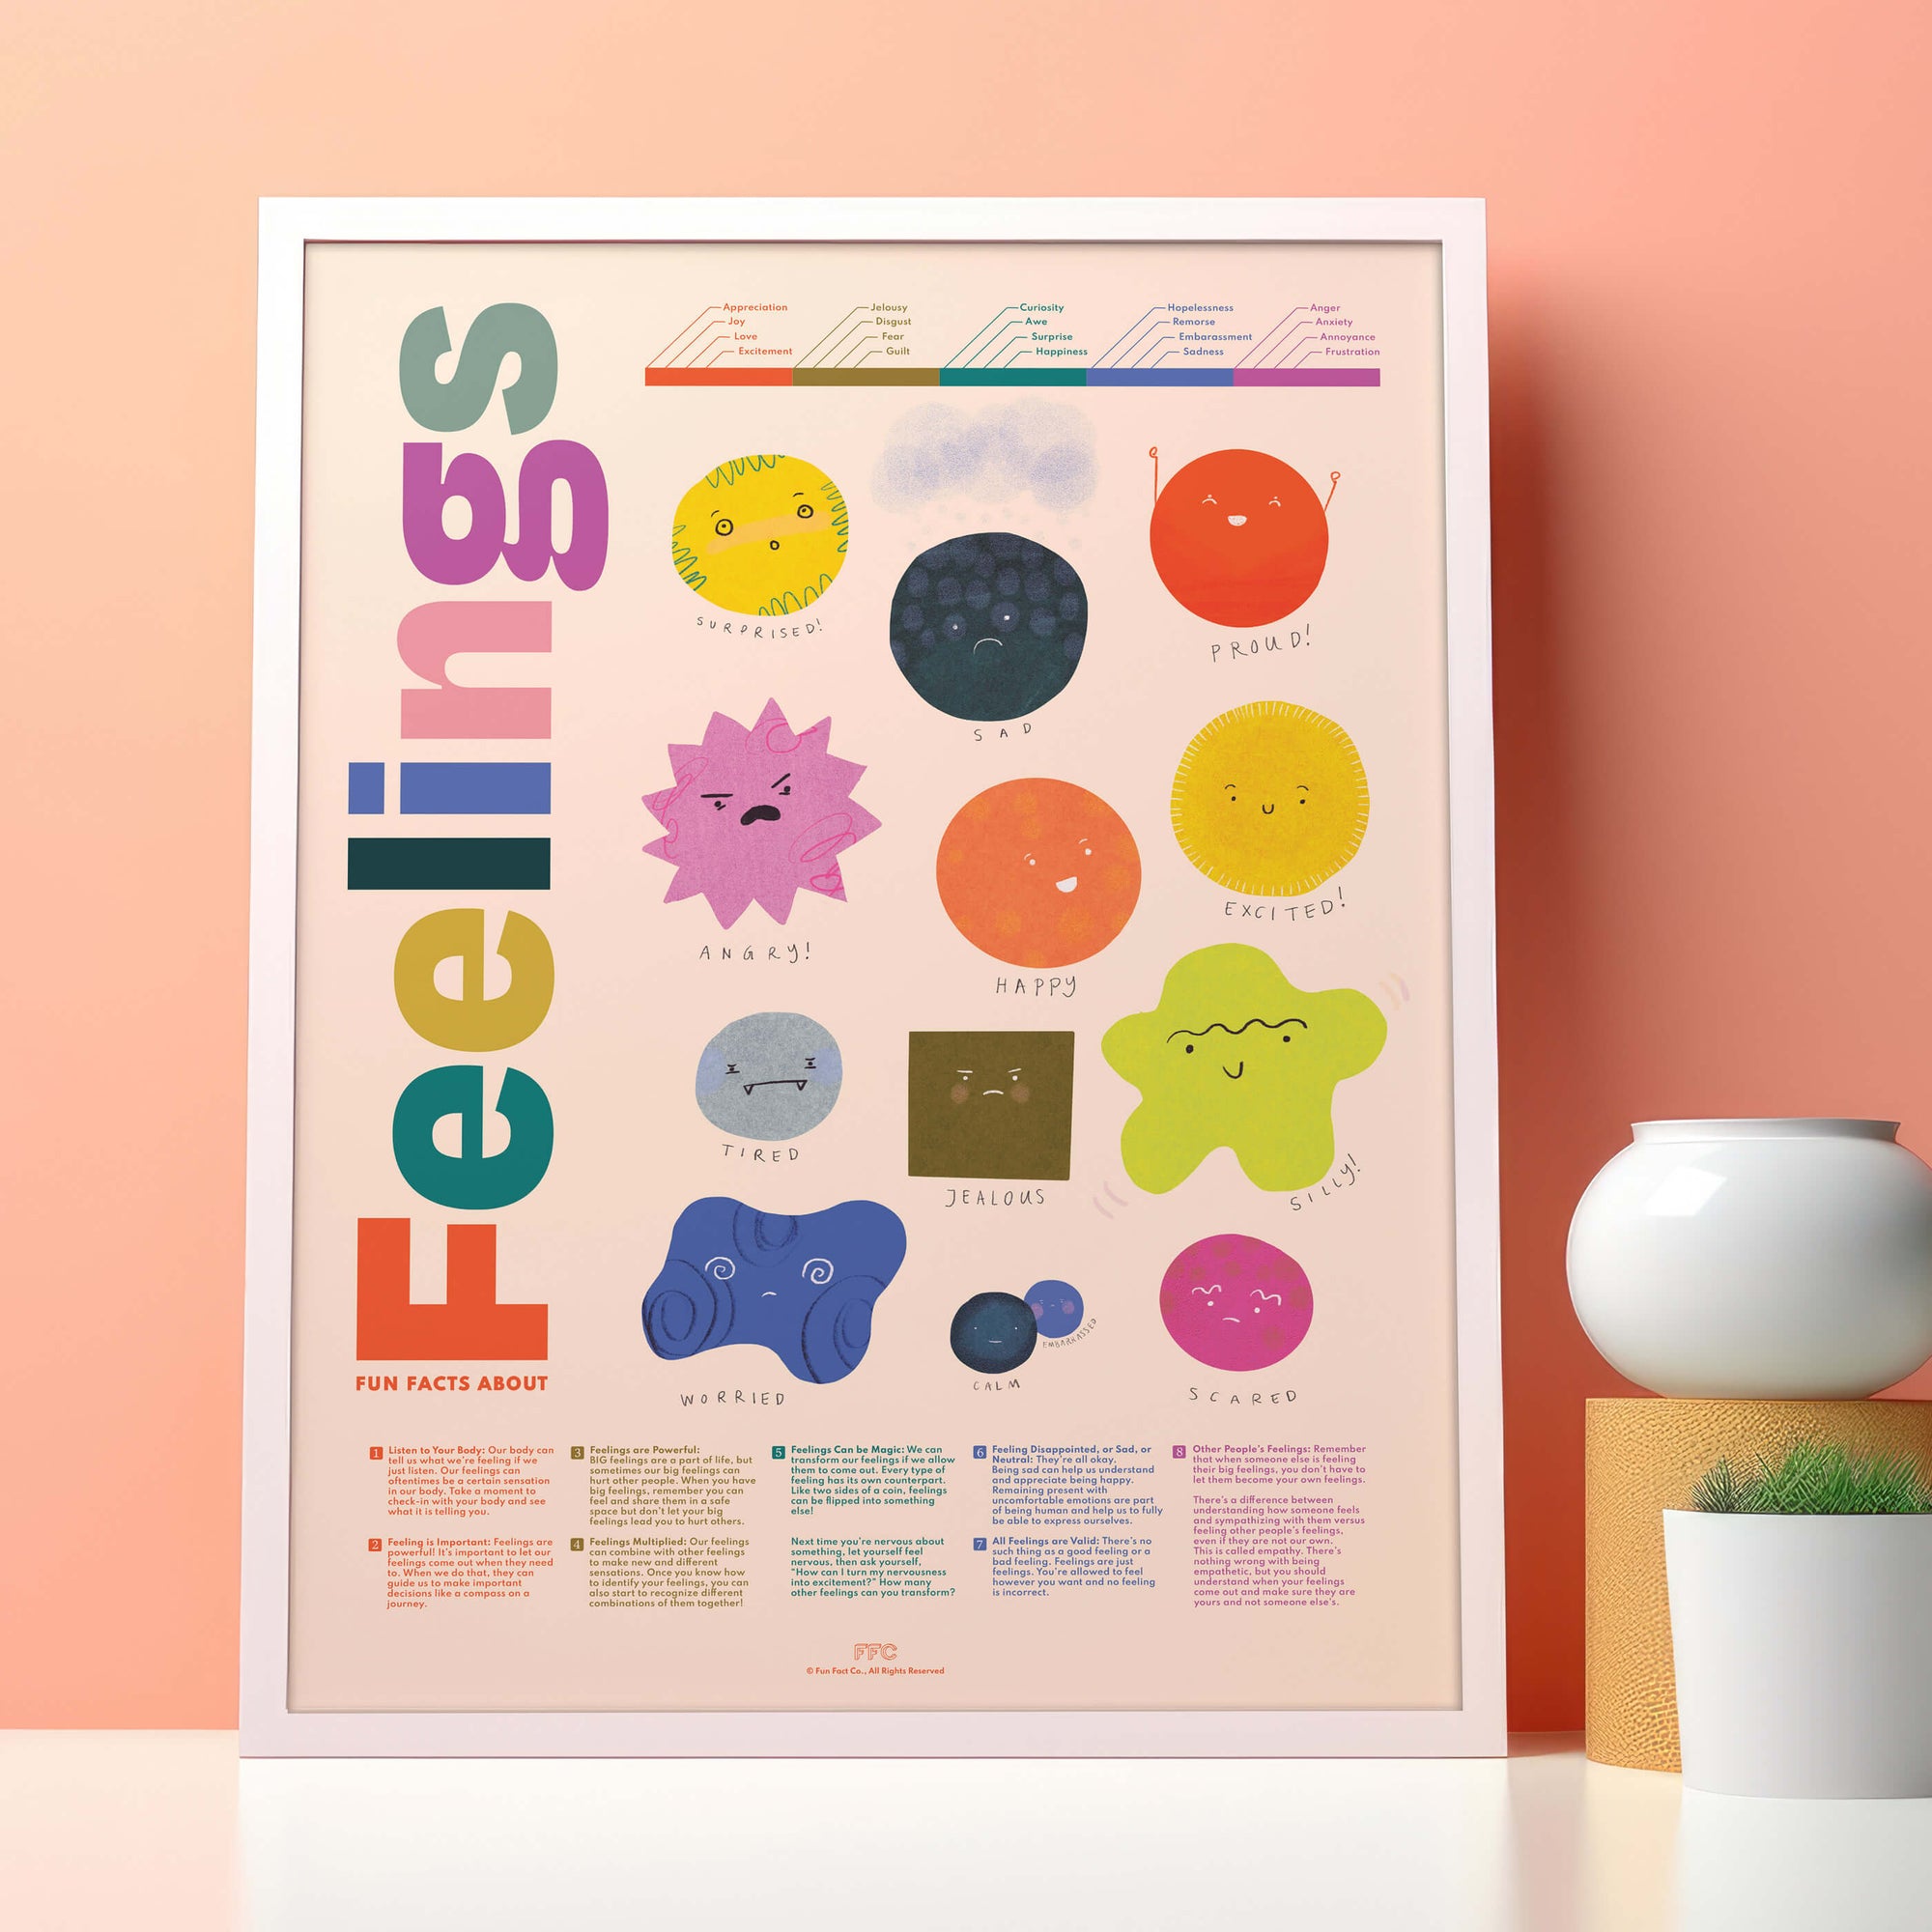 Fun Facts About Feelings - Illustrated Emotions Poster by Fun Fact Co. - White Frame, Modern Room